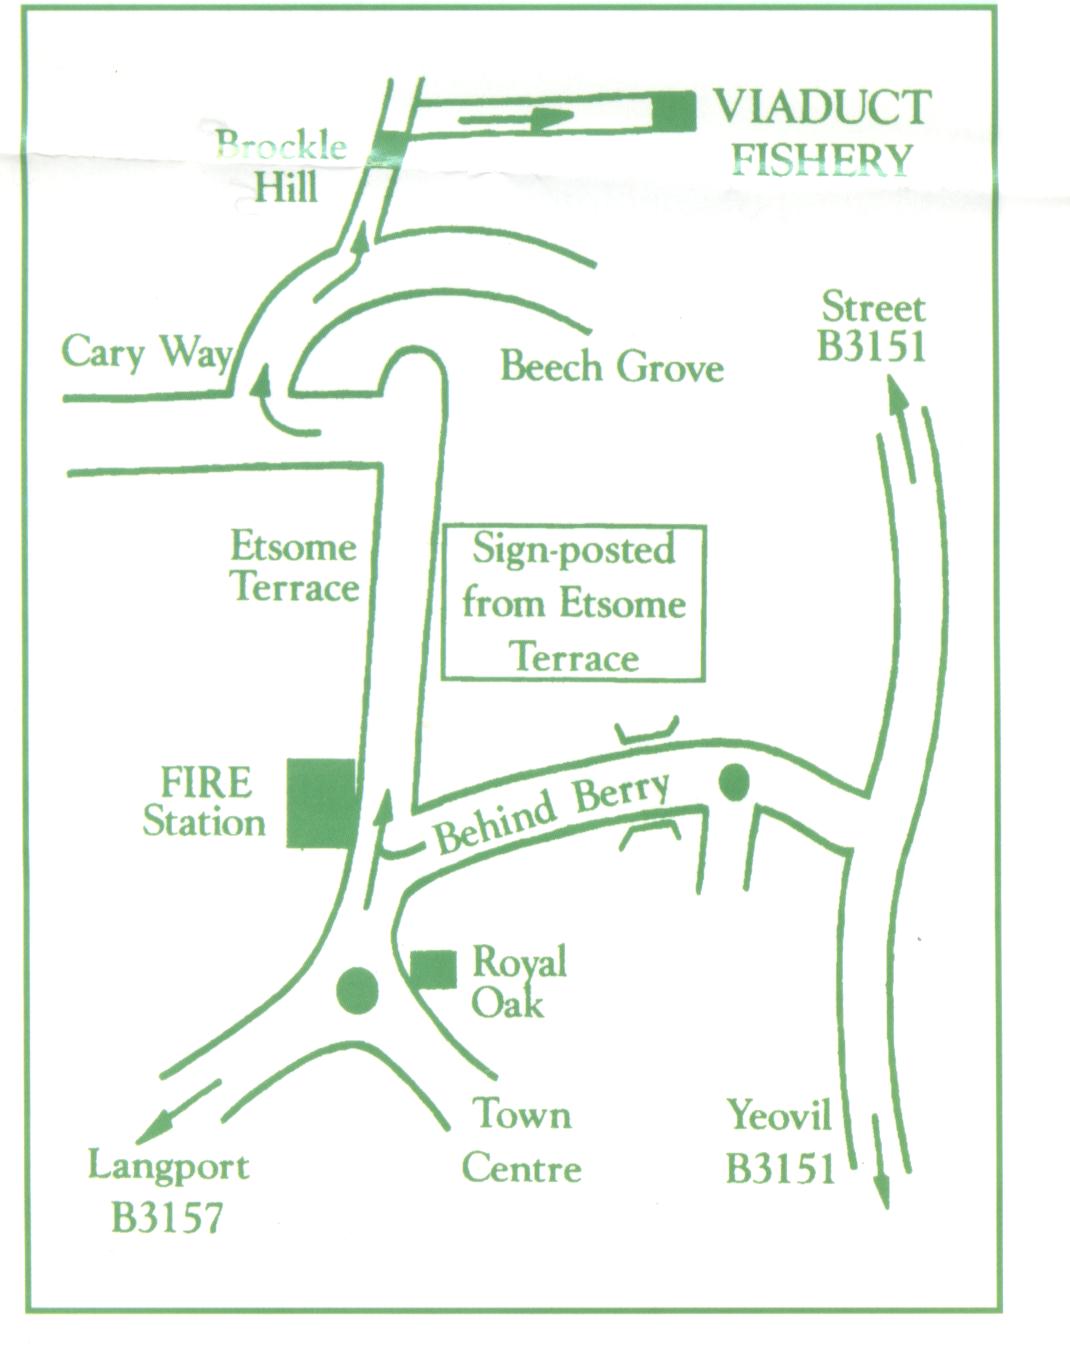 Directions to Viaduct Fisheries